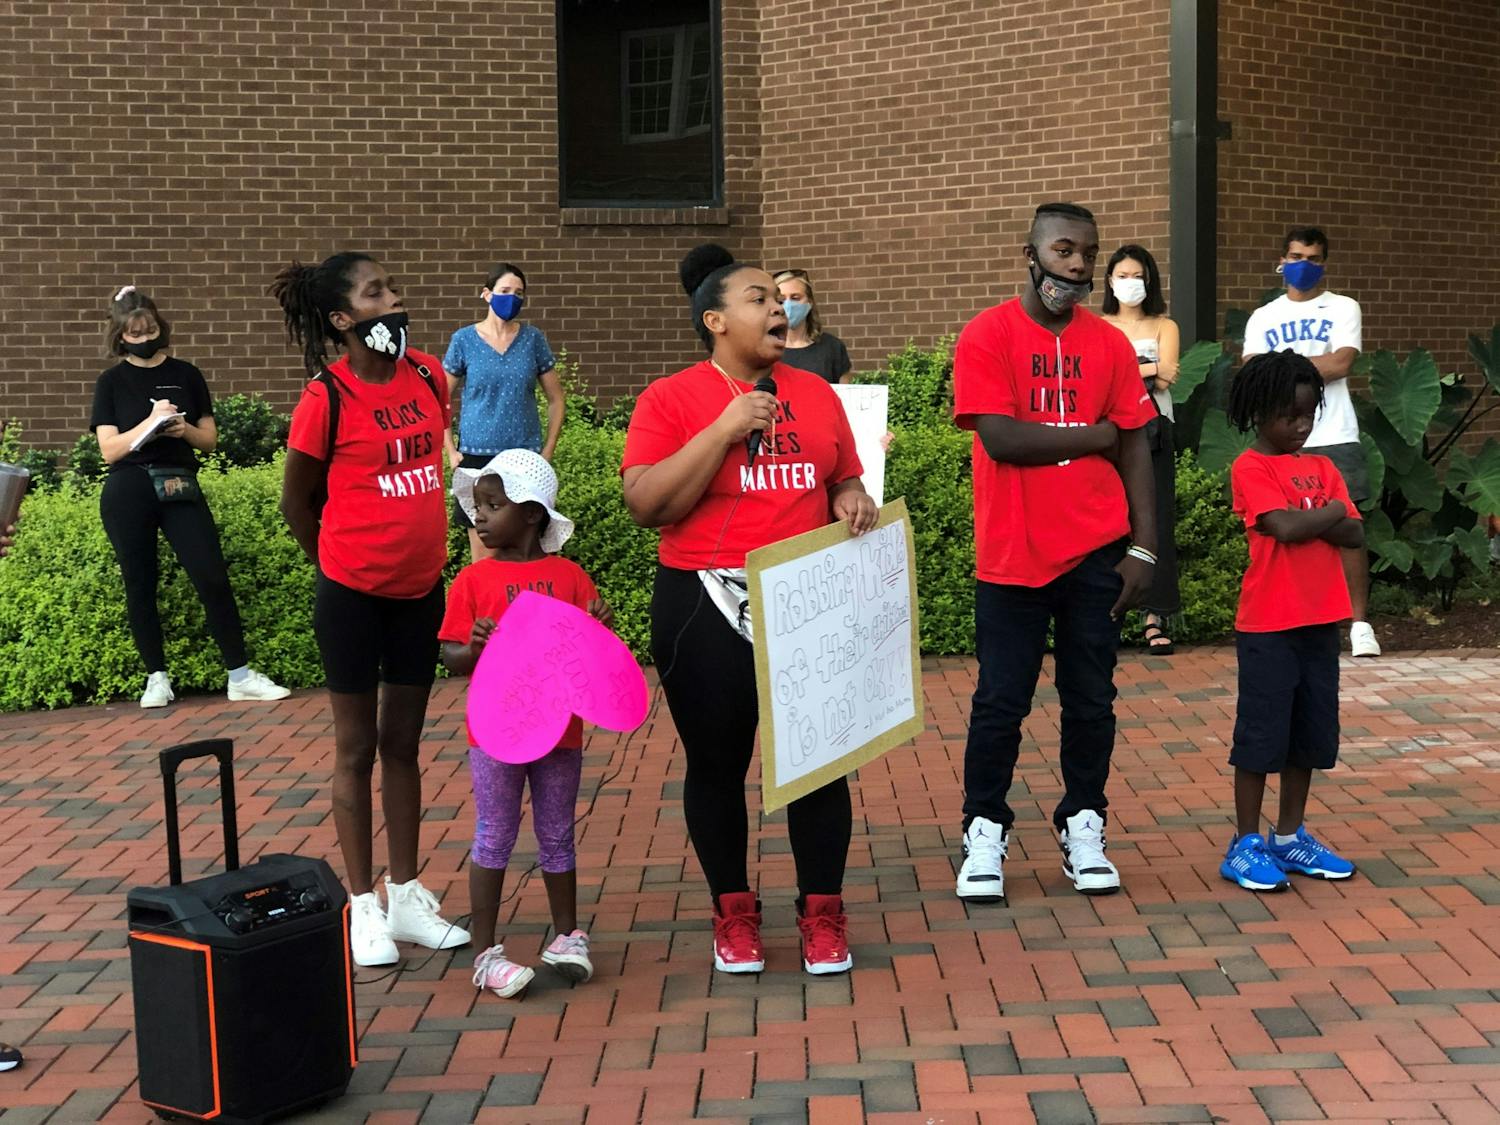  Ashley Harris speaks at a #RochelleBoysMatter protest and march in Durham Sept. 4, 2020. The protest was held after police allegedly drew their weapons on three boys playing in an east Durham apartment complex.

